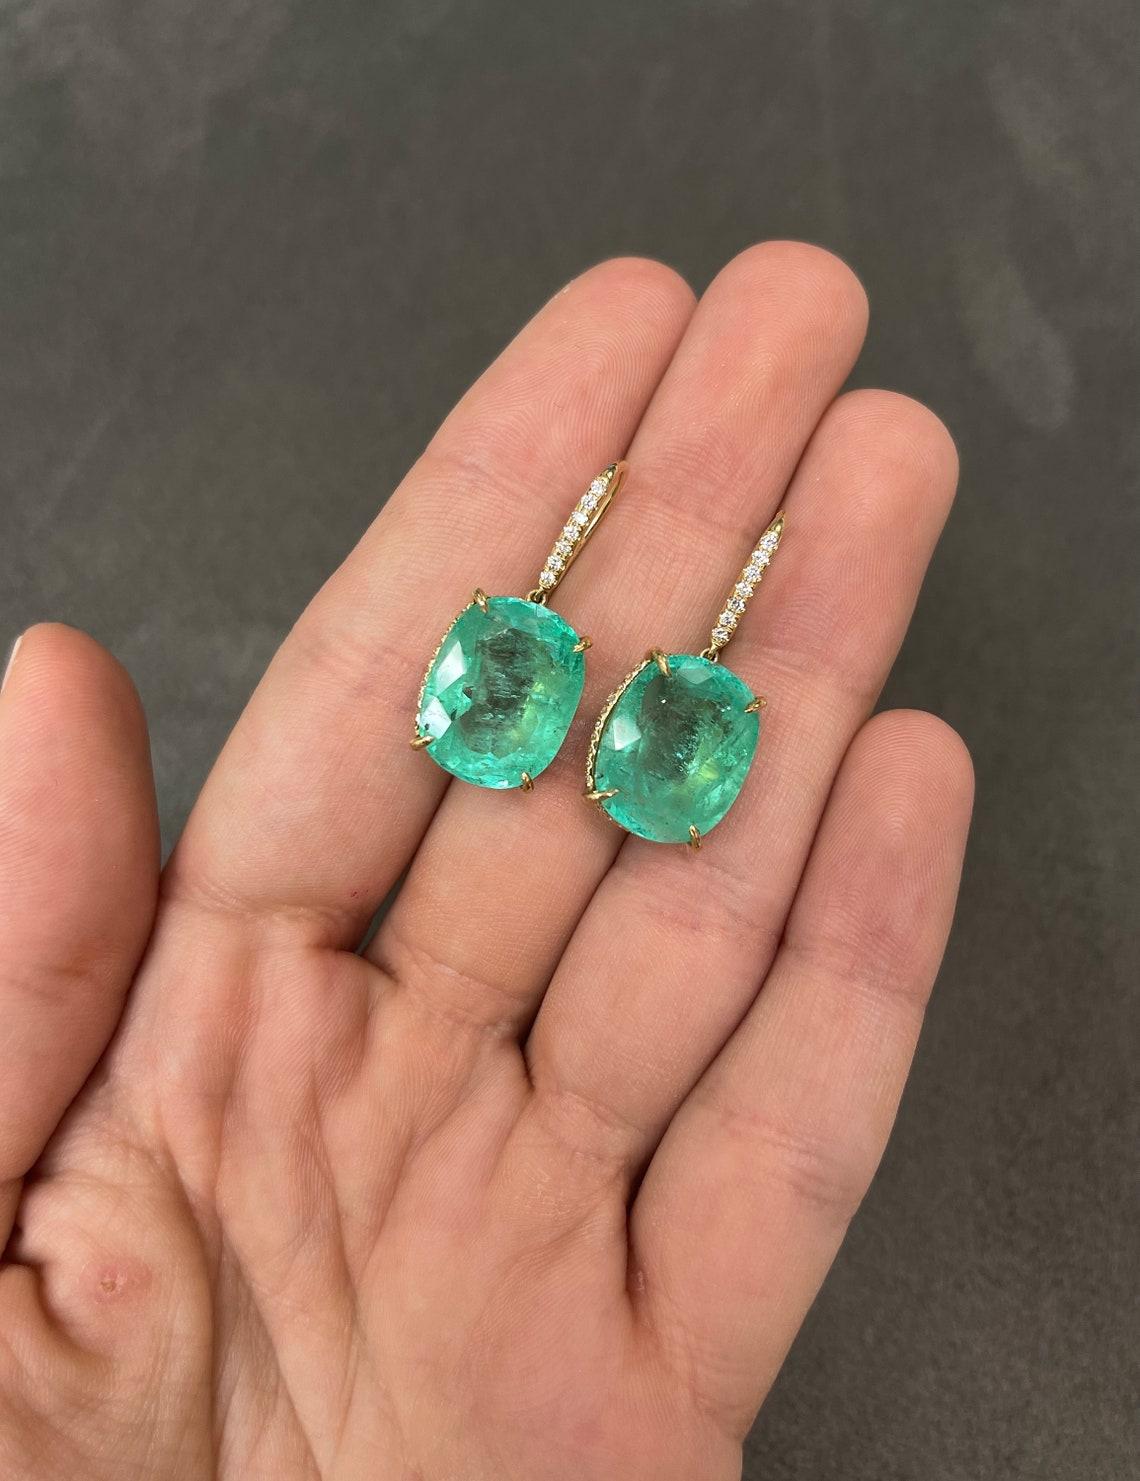 Large cushion cut Colombian emerald and diamond accent dangling earrings in fine 18K yellow gold. Displayed are medium-green cushion emeralds with very good transparency, accented by a simple prong gold mount, allowing for the emeralds to be shown